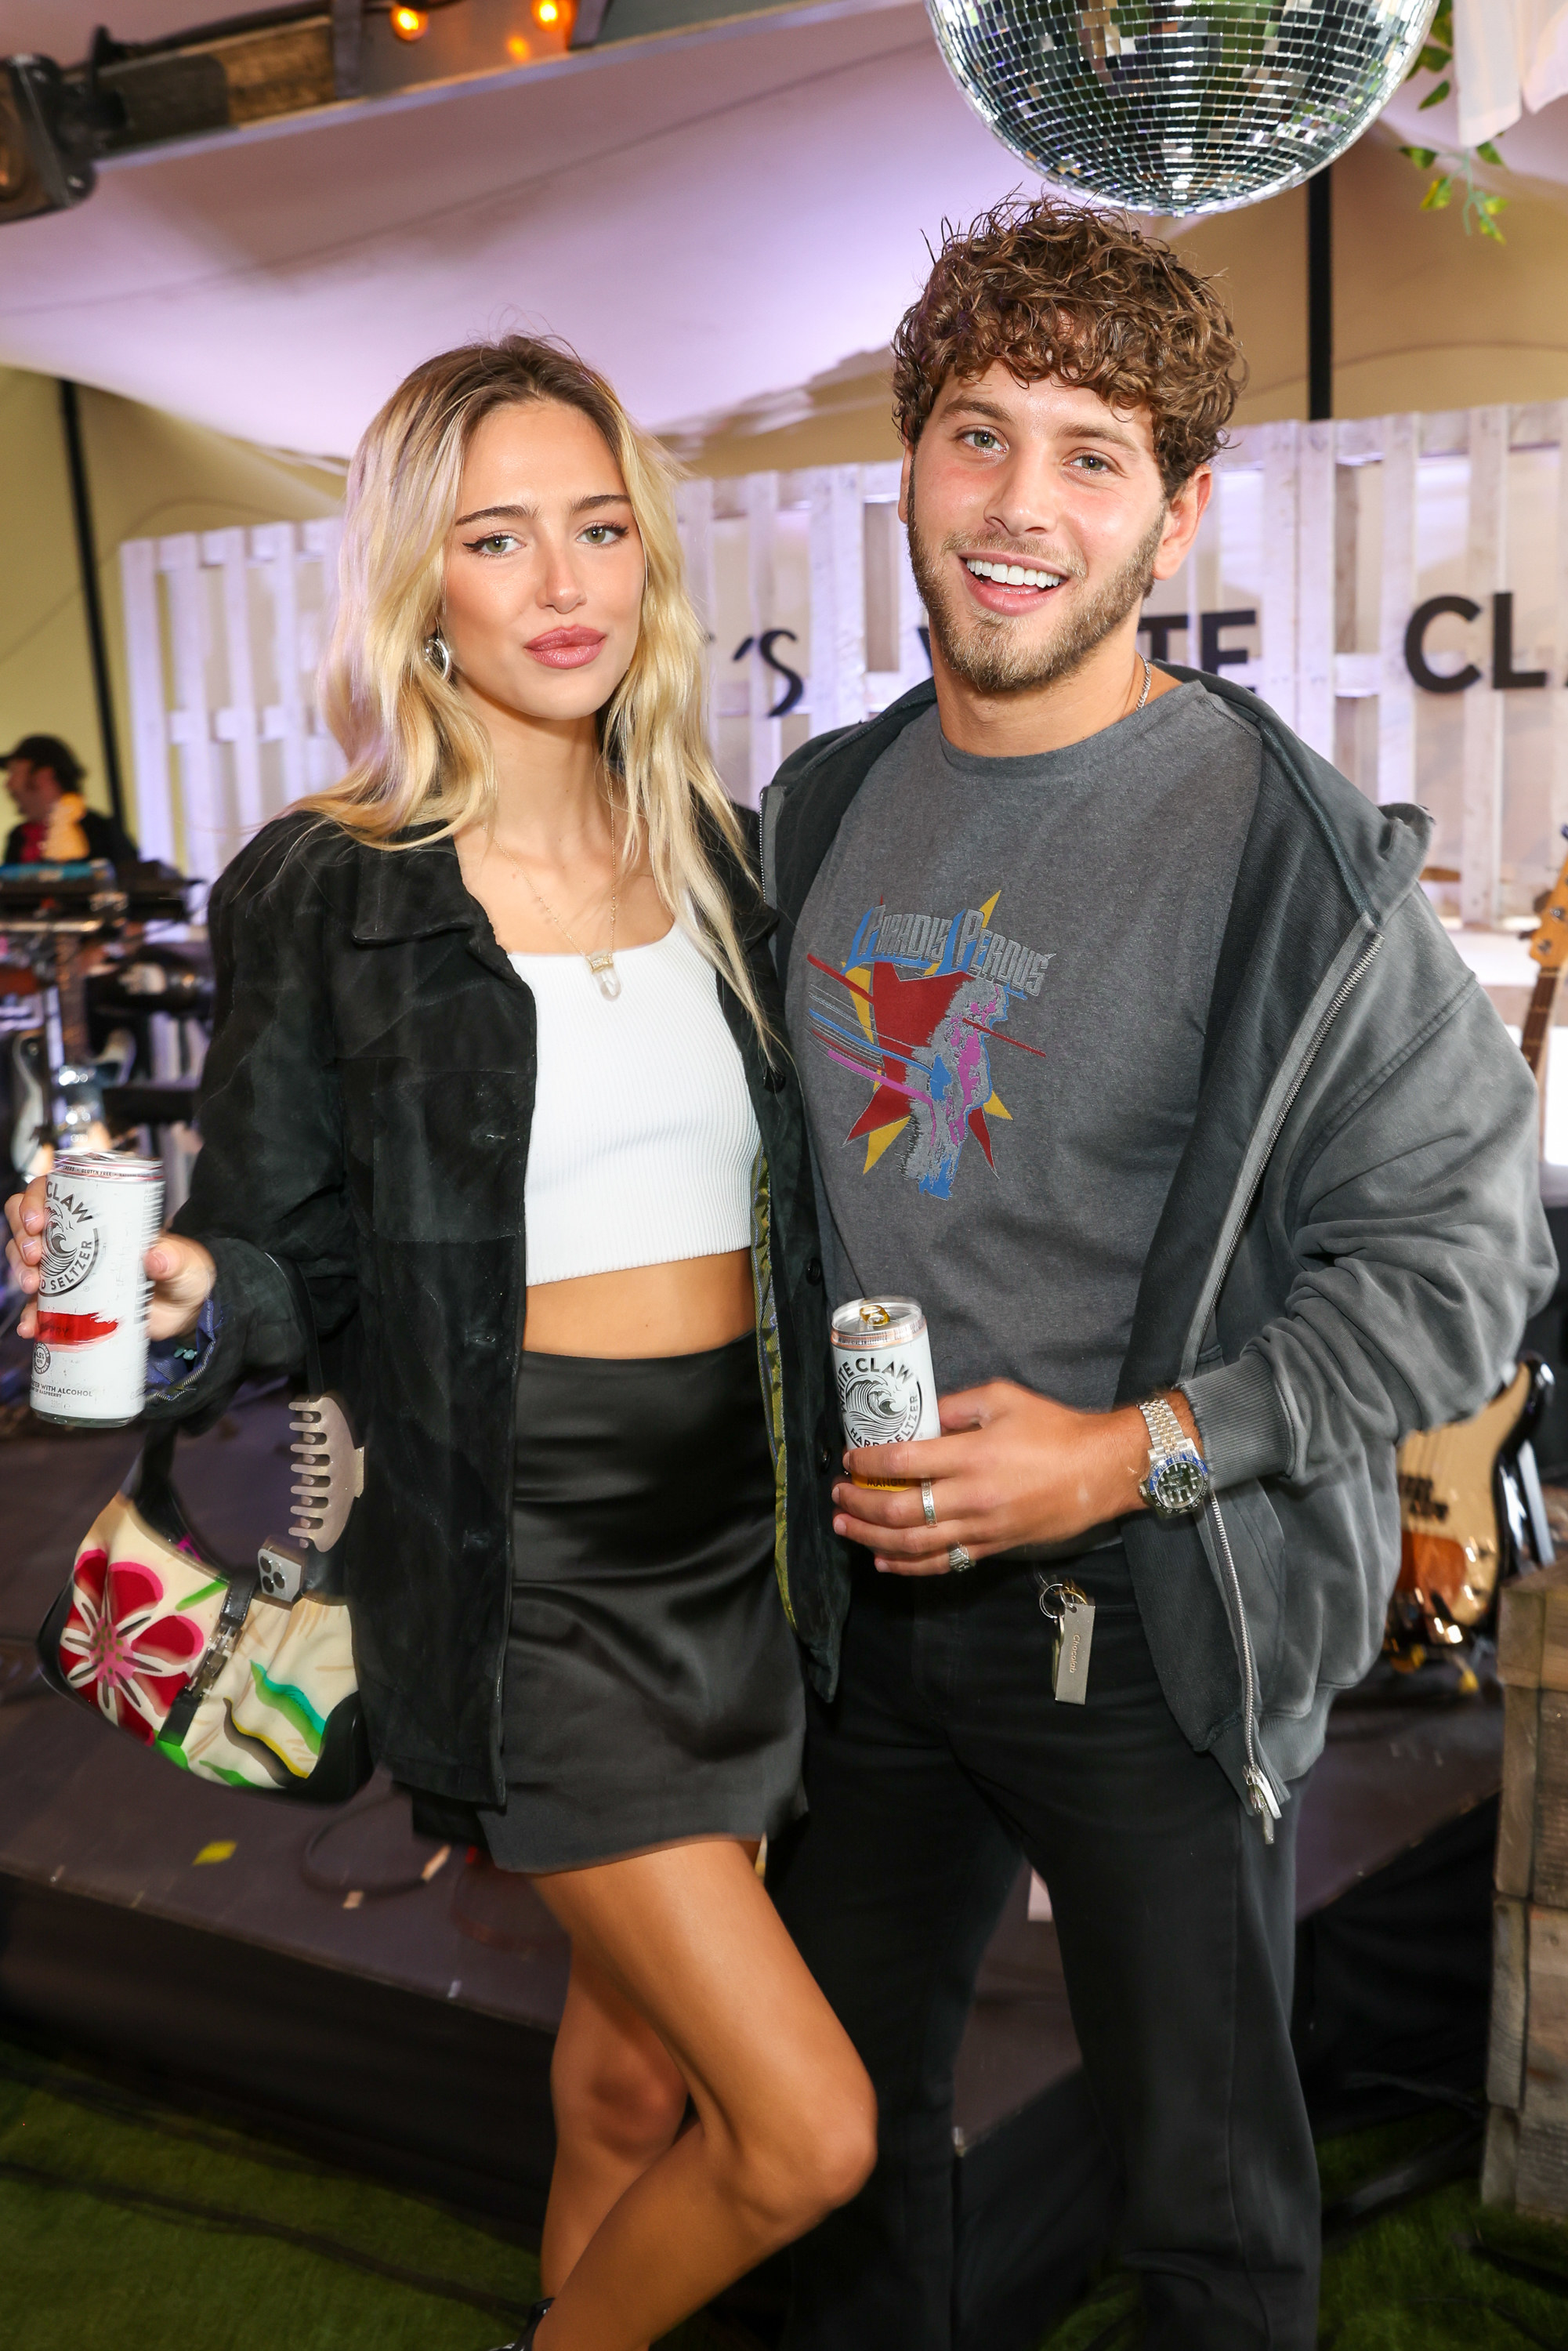 Delilah and Eyal posing for a photo while holding White Claws